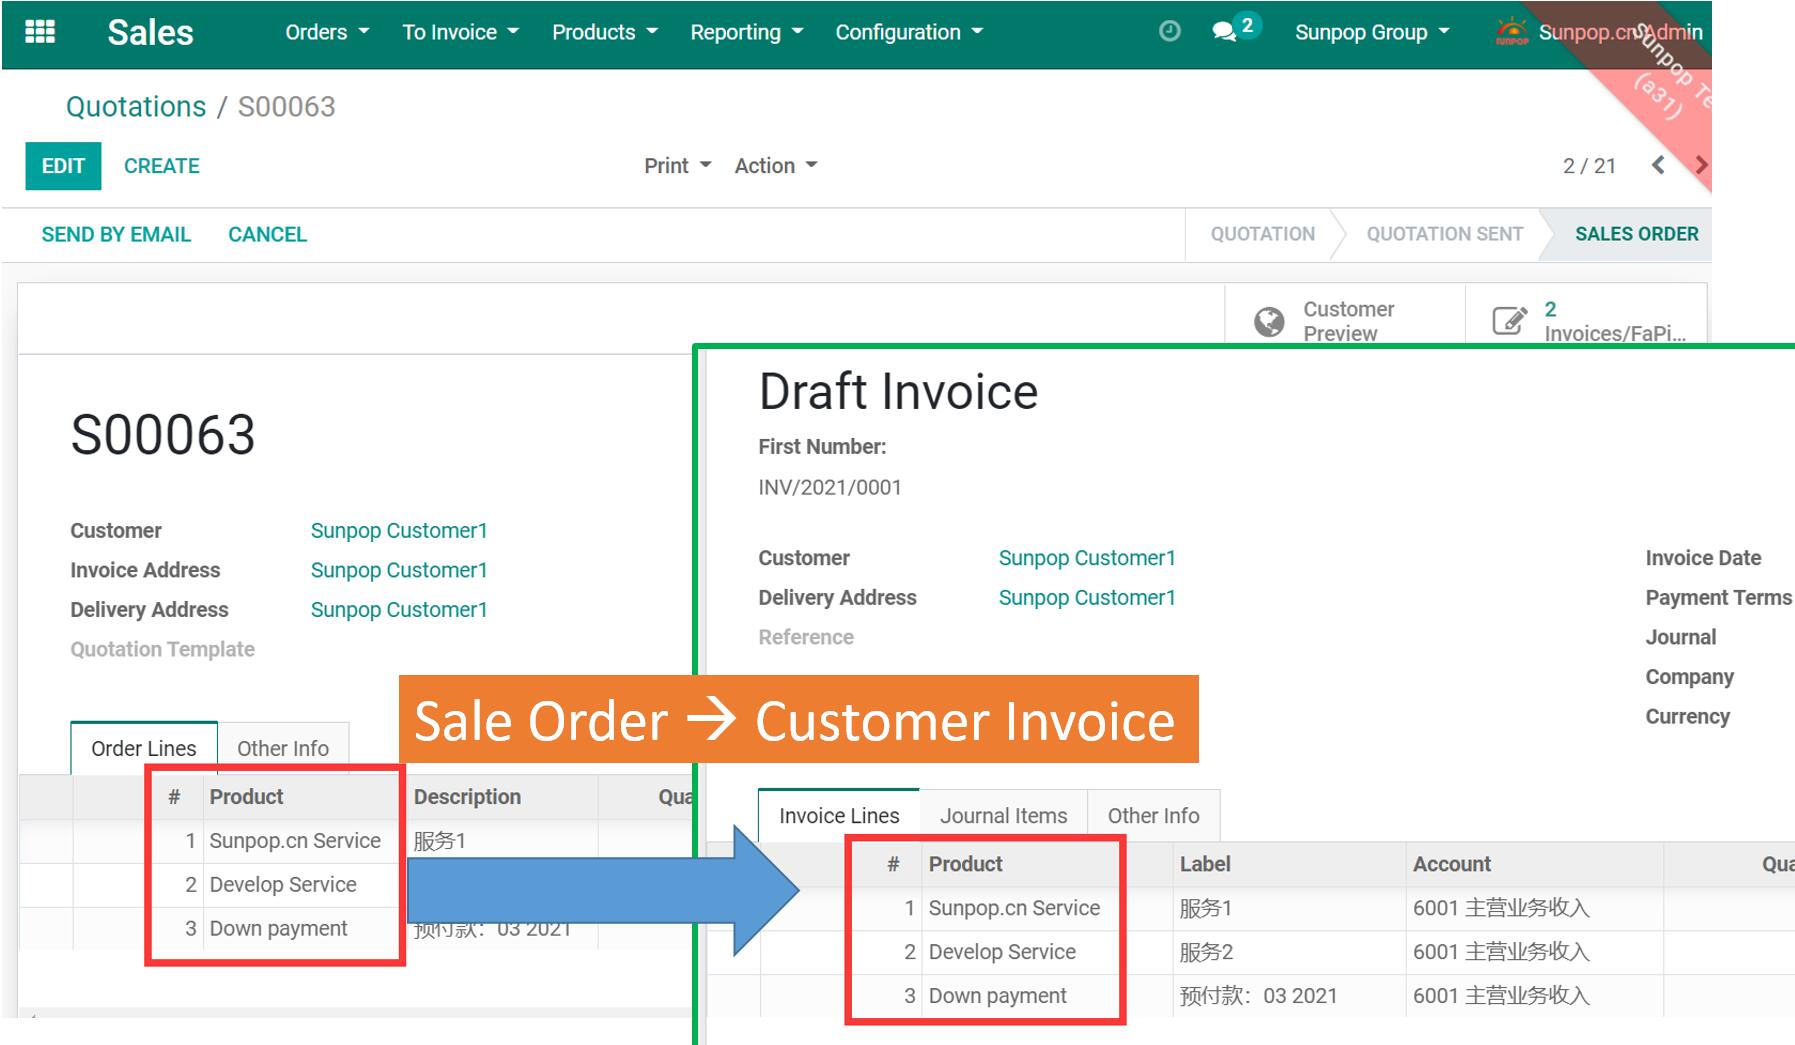 Account Invoicing Line Number Sequence, Bill Line Number